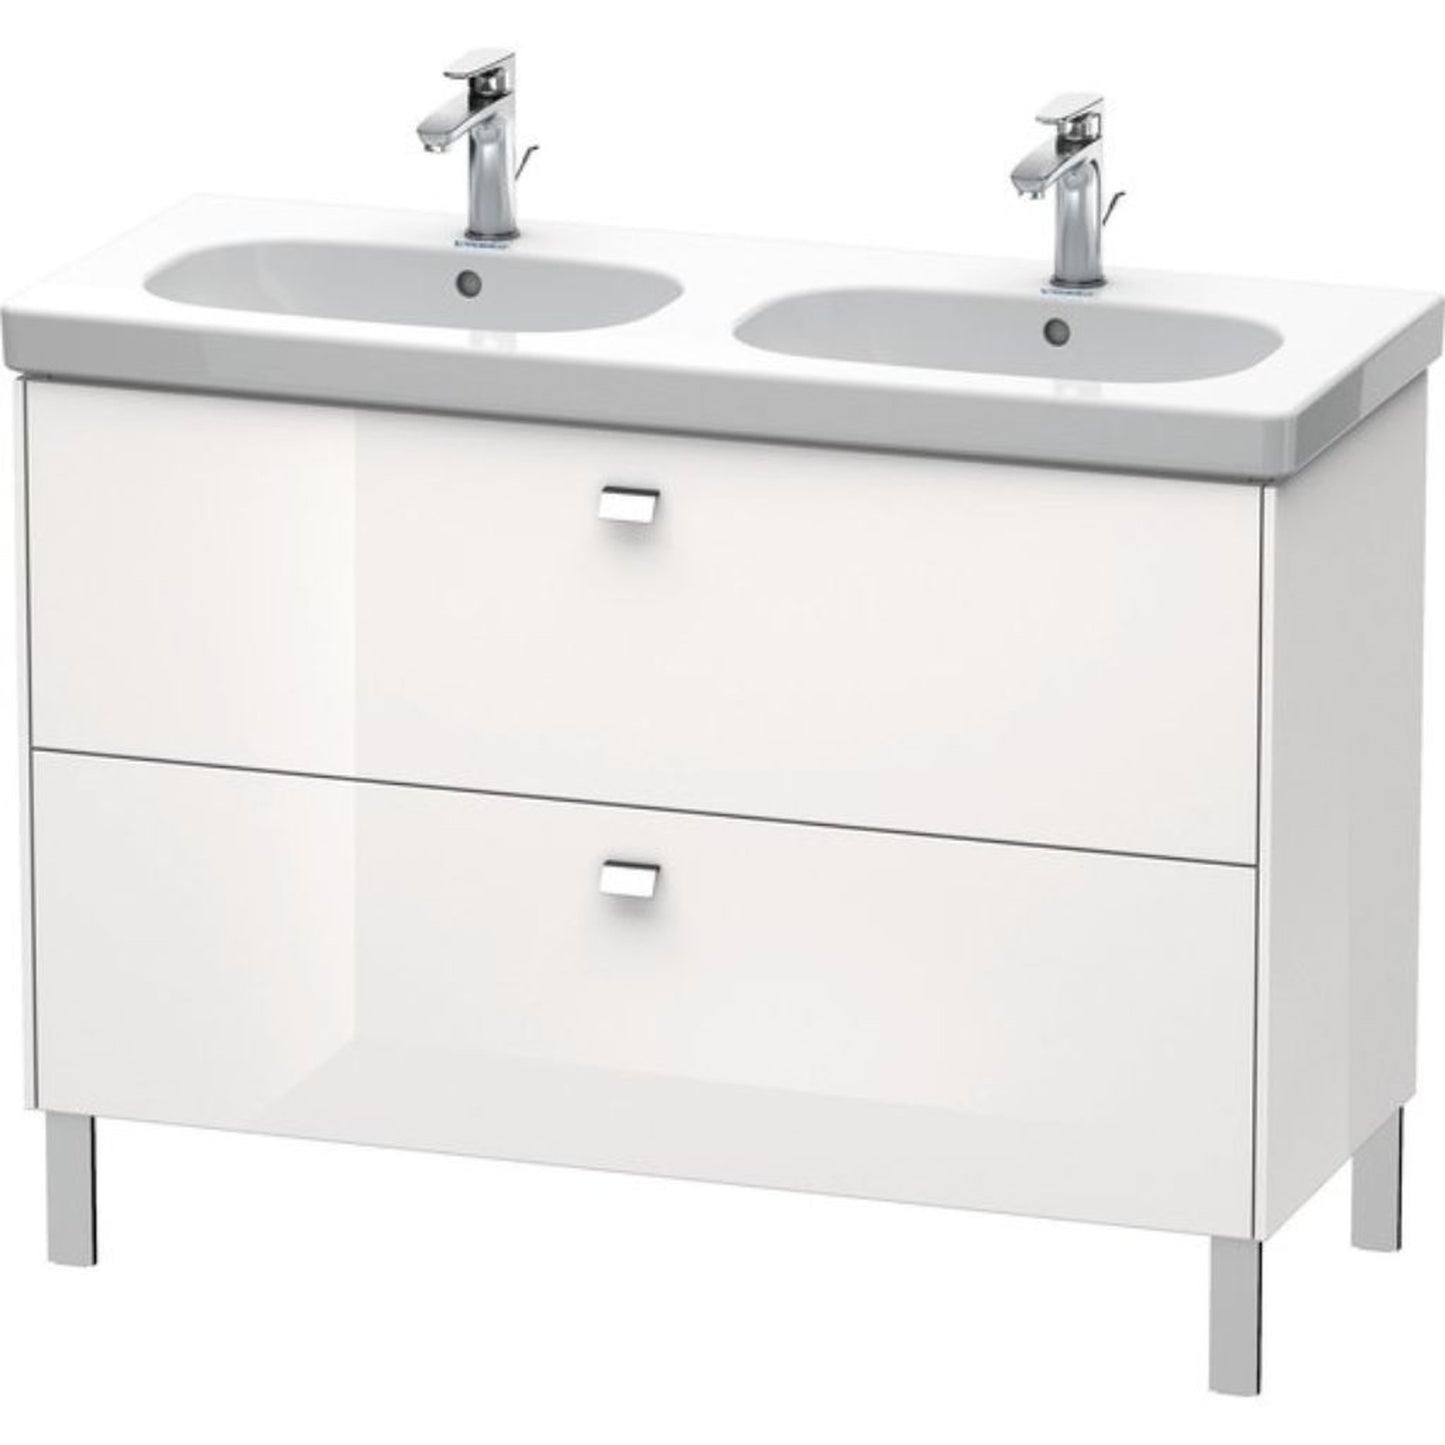 Duravit Brioso BR44280 46" x 27" x 18" Two Drawer Floor Standing Vanity Unit in White High Gloss and Chrome Handle